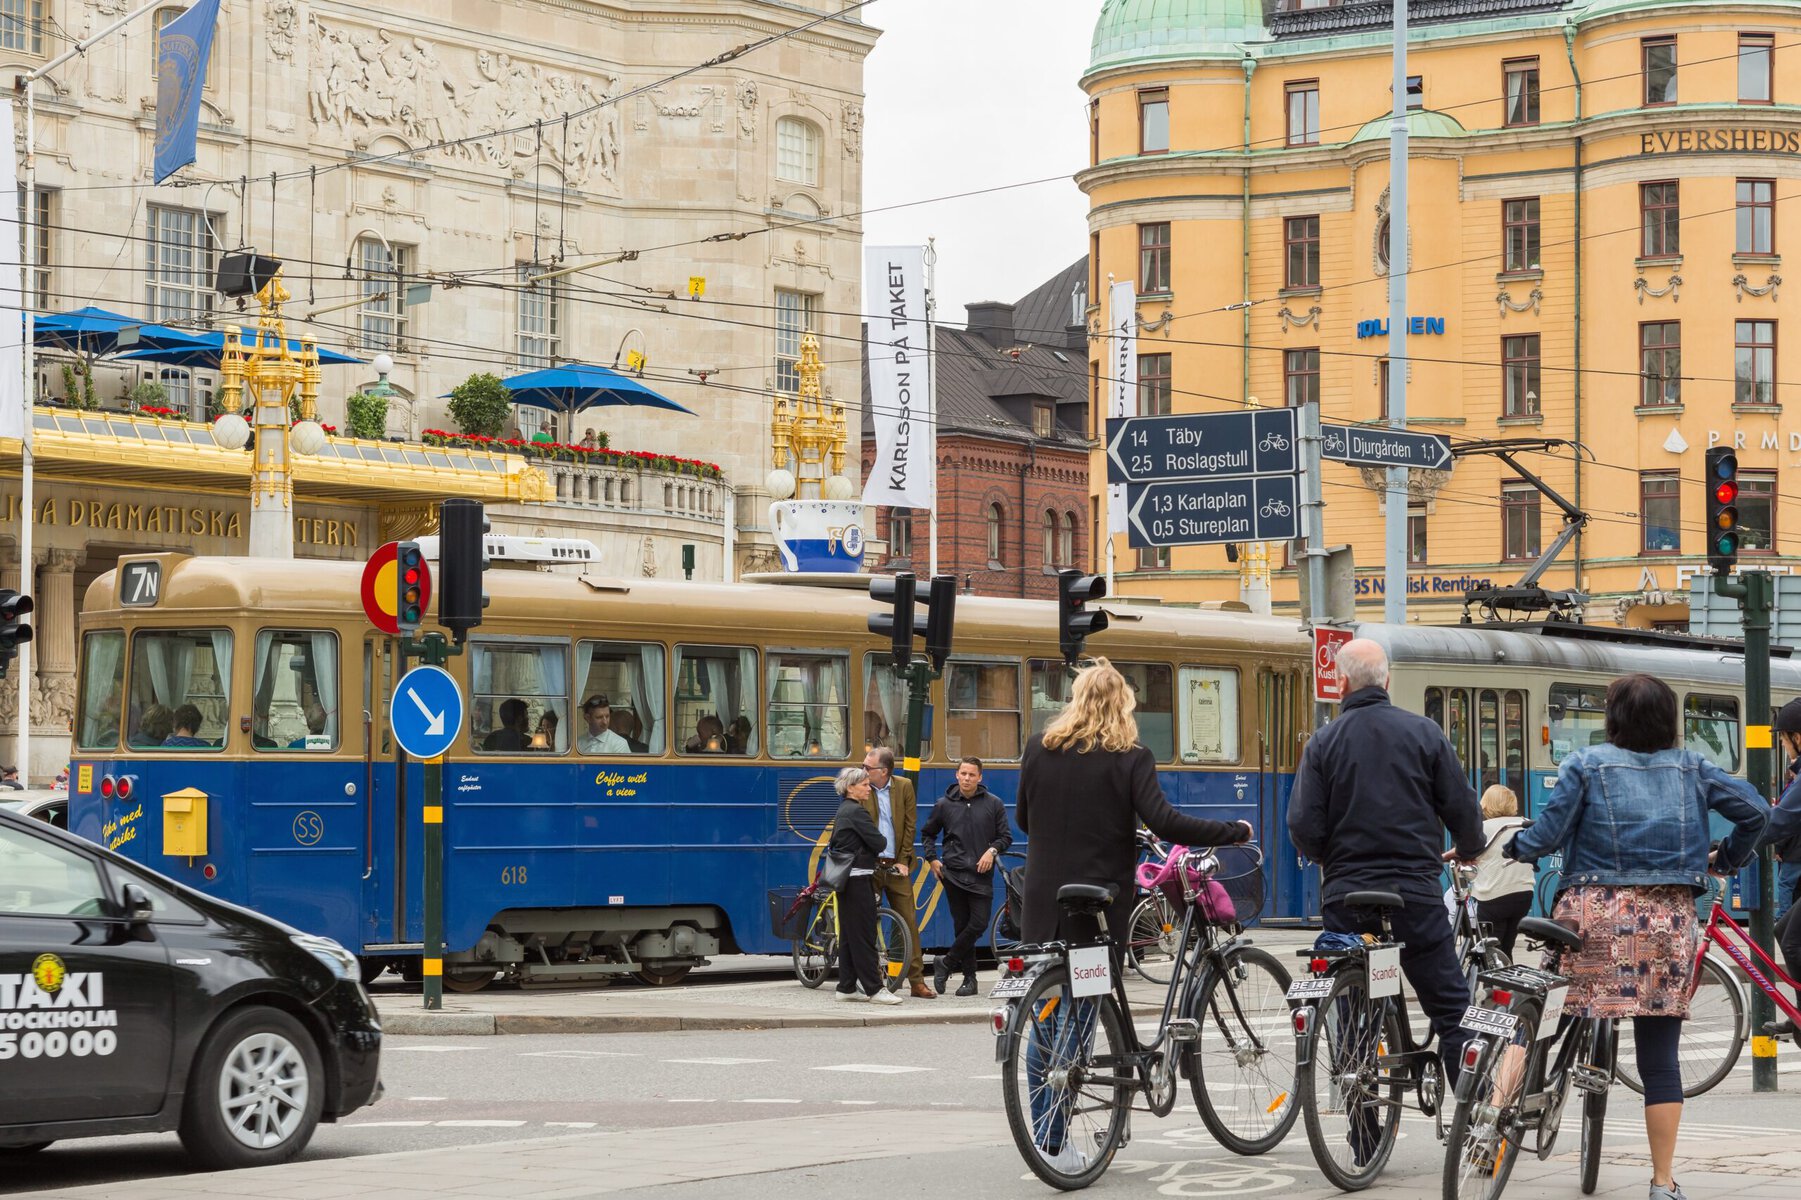 Cyclists and tram traffic in Stockholm's city center.